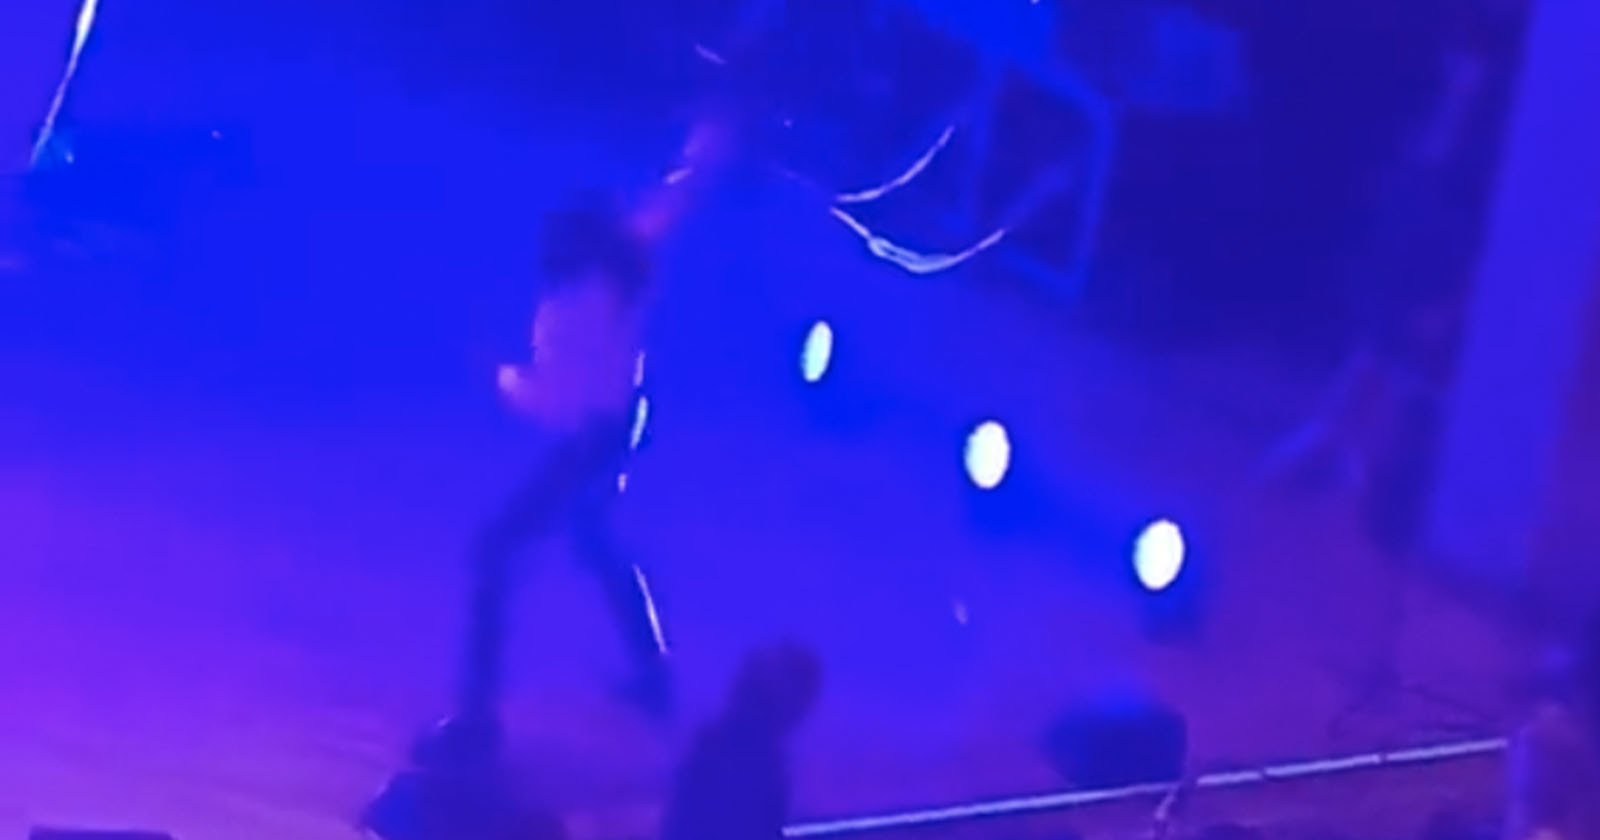 Singer Steve Lacy Smashes a Camera After Fan Throws it at Him